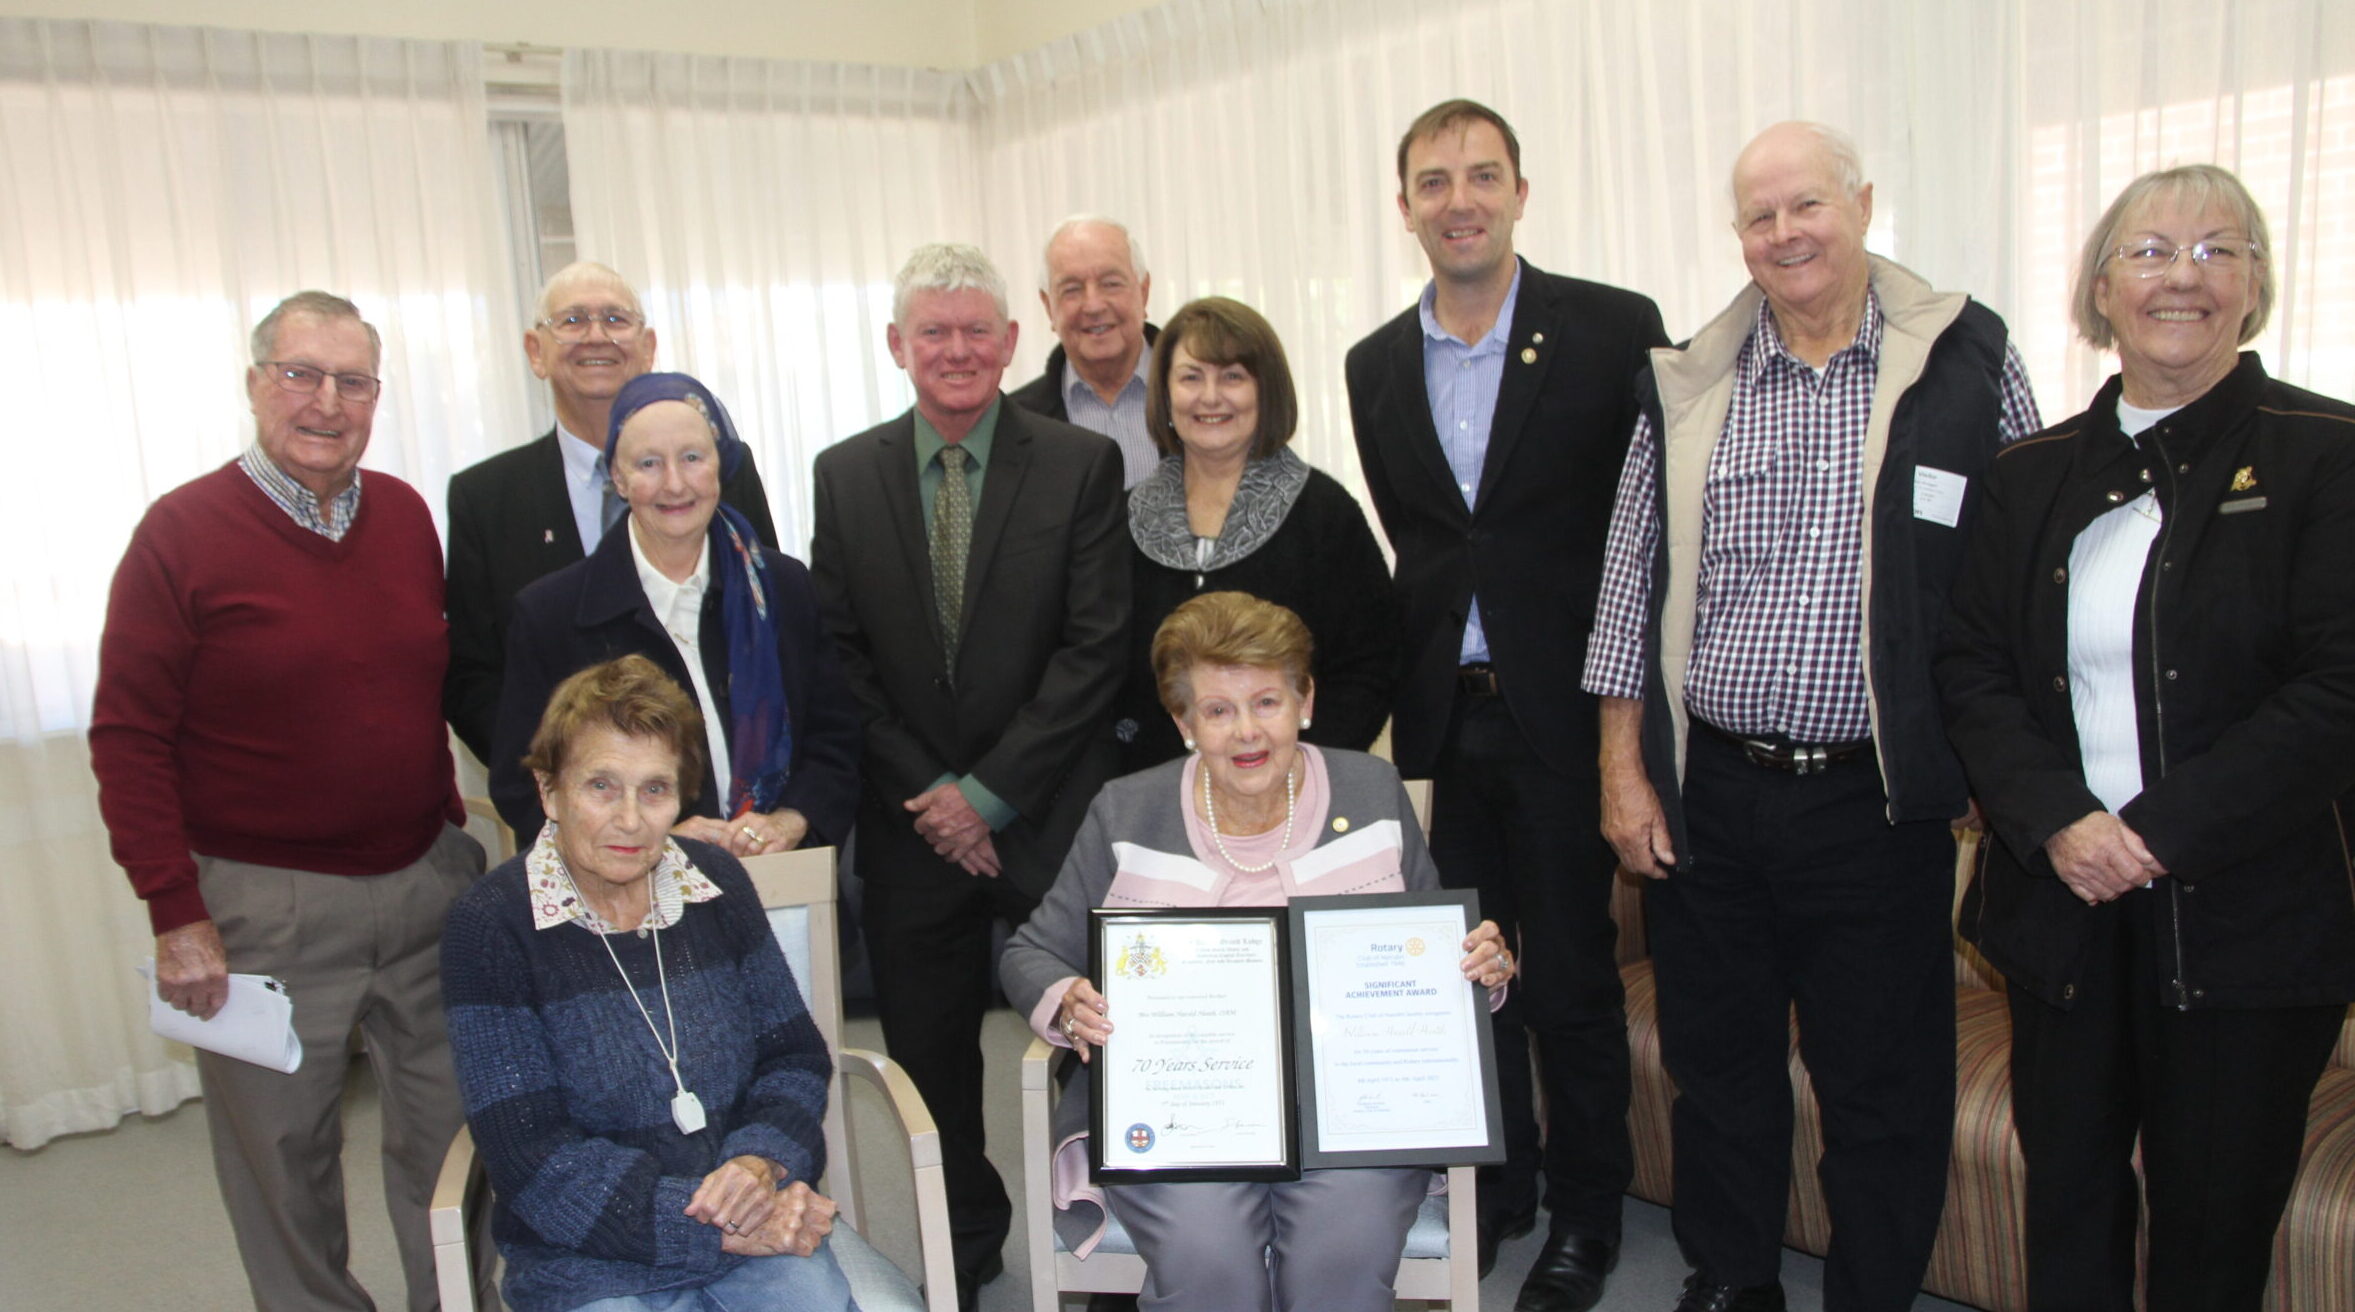 Appreciation certificates recognise late Bill Heath’s many contributions